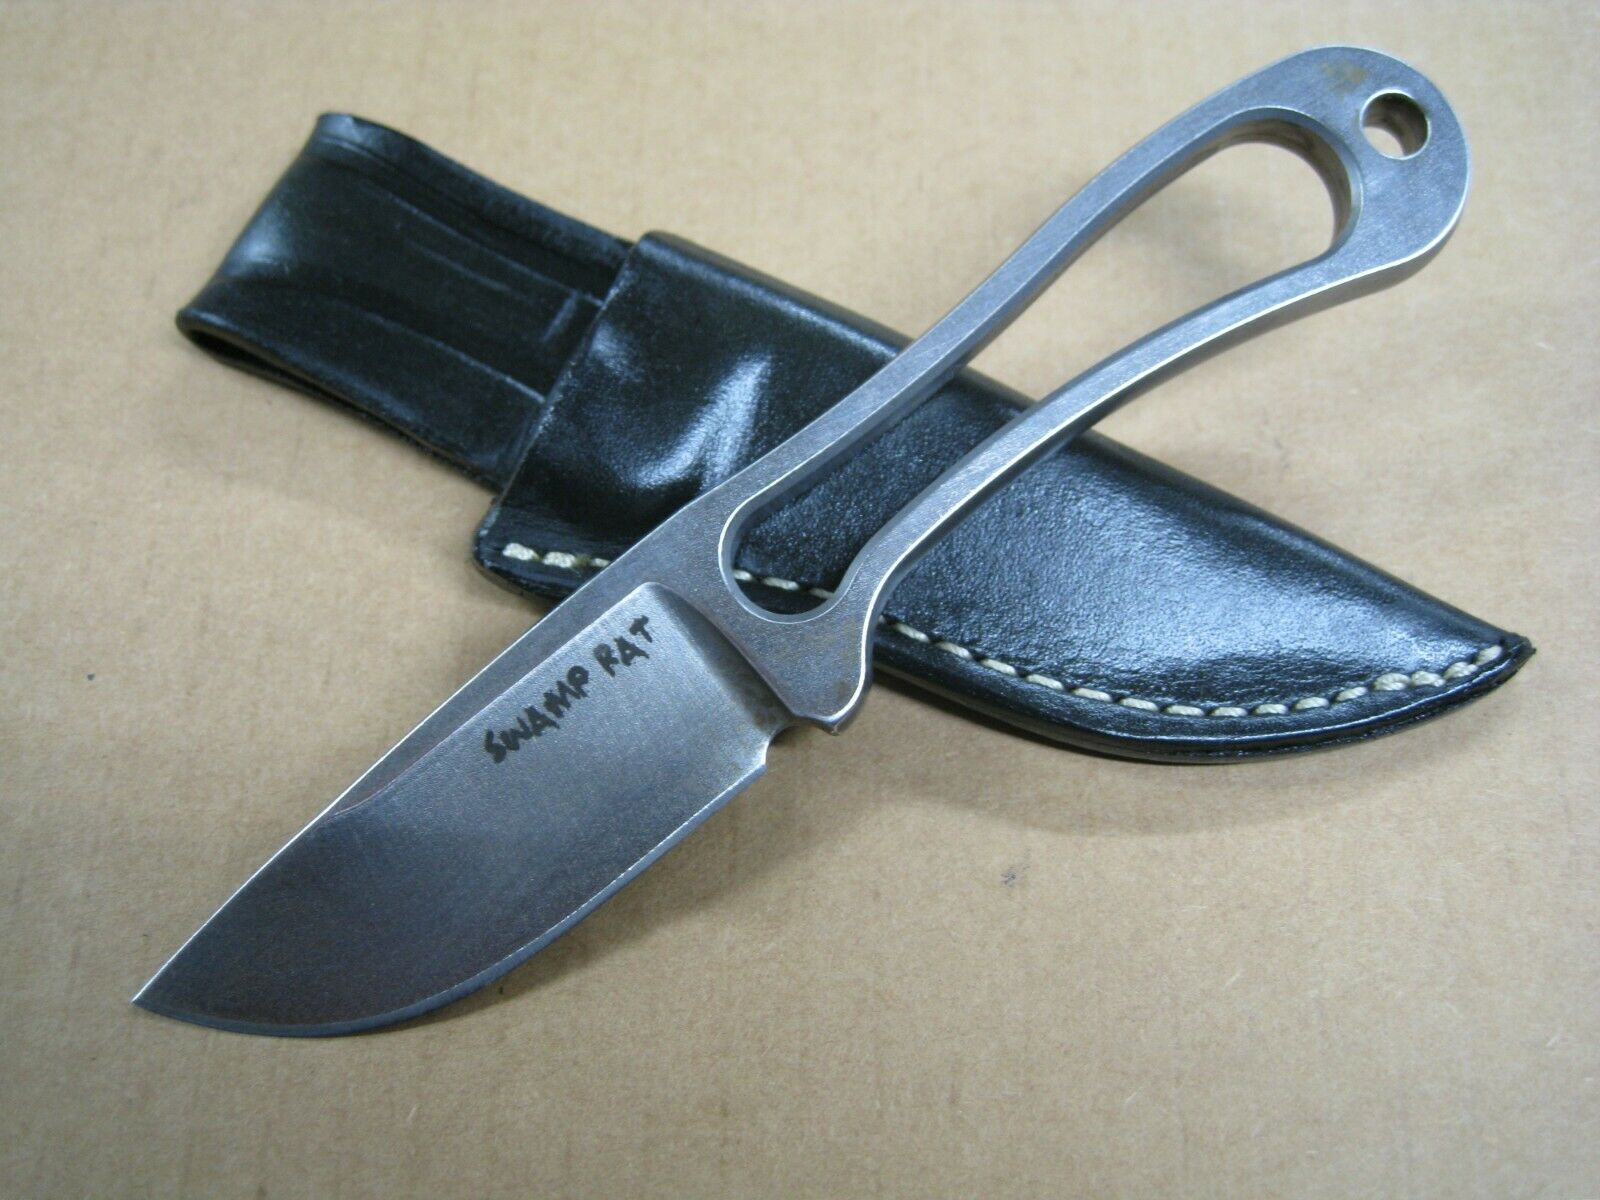 Citadel Forest Bluebeech and Leather Sheath- Kitchen Knife